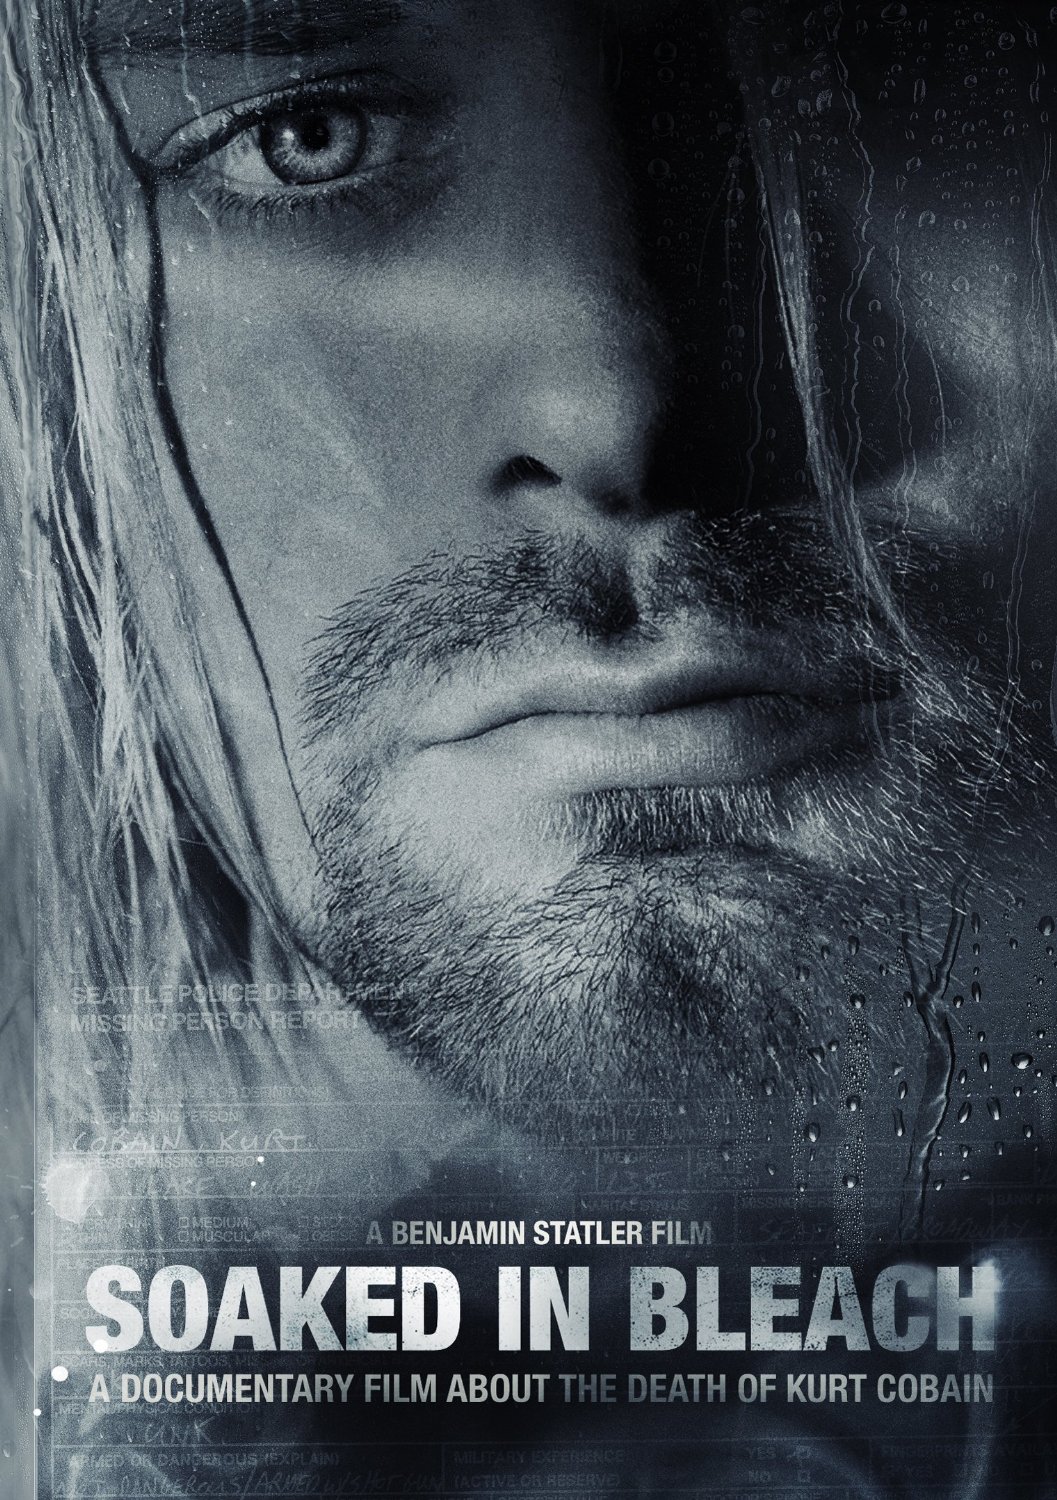 NeuFutur Coverage of Soaked in Bleach